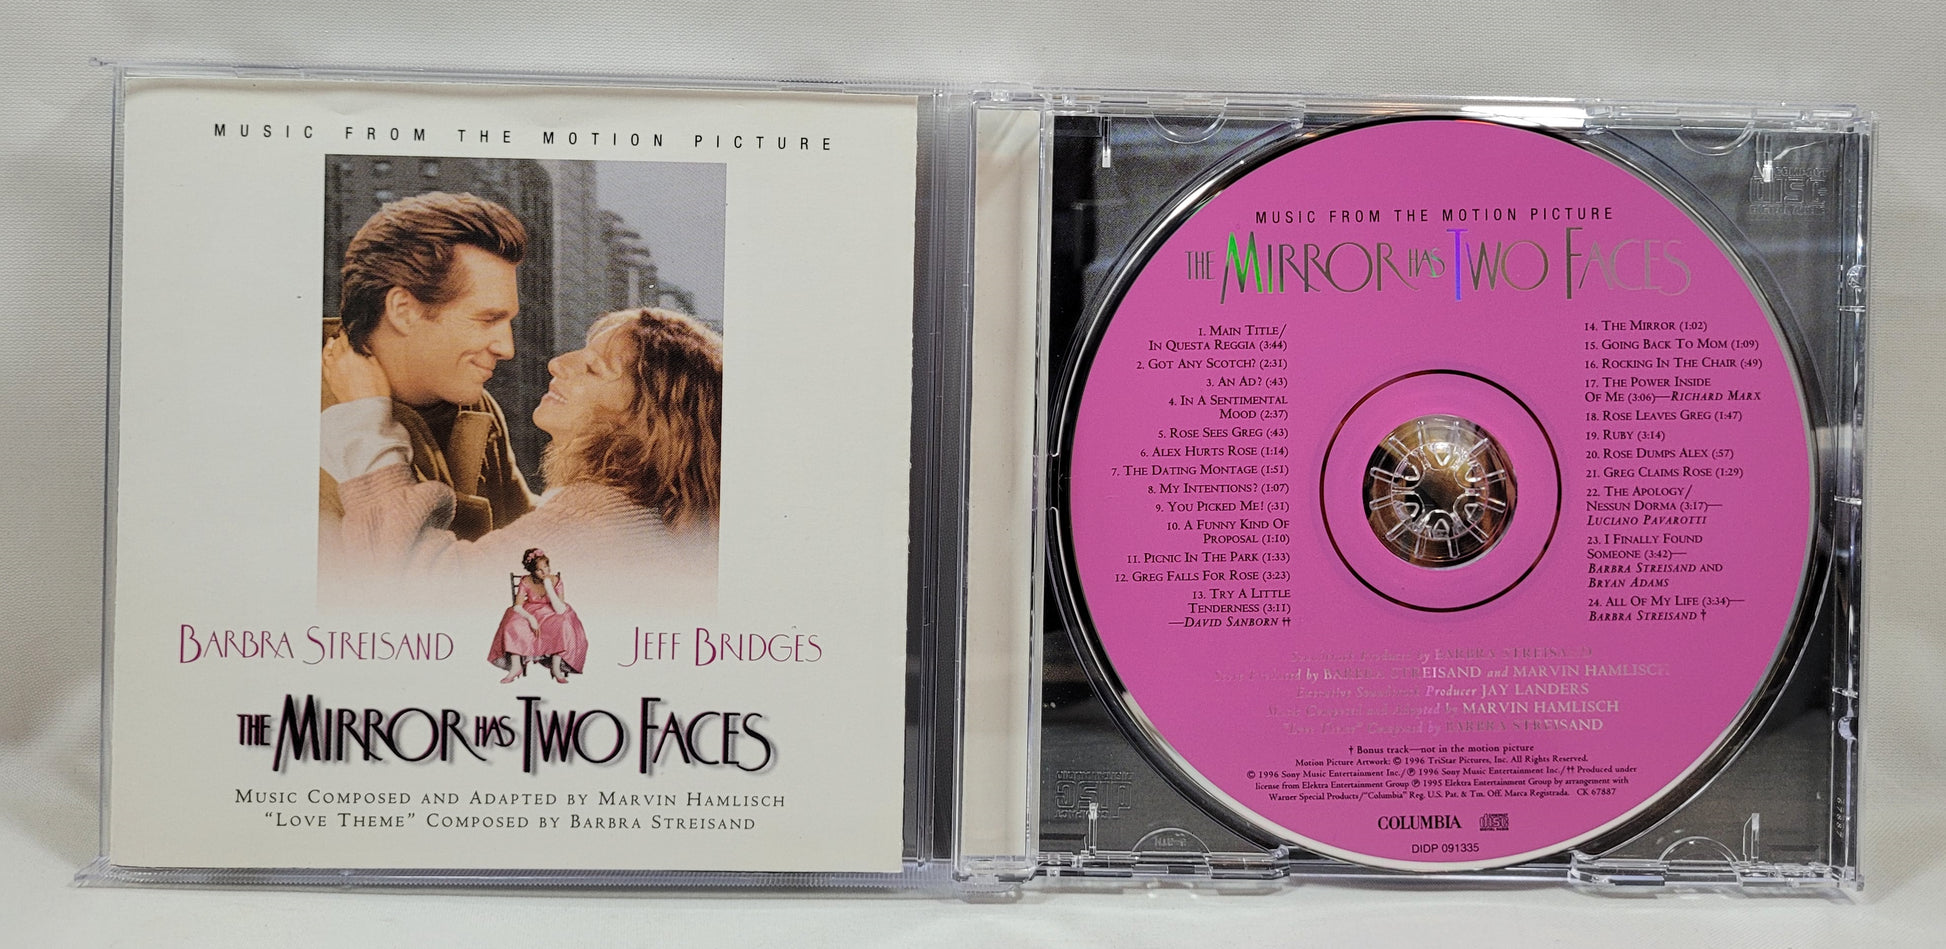 Soundtrack - The Mirror Has Two Faces [1996 Used CD] [B]